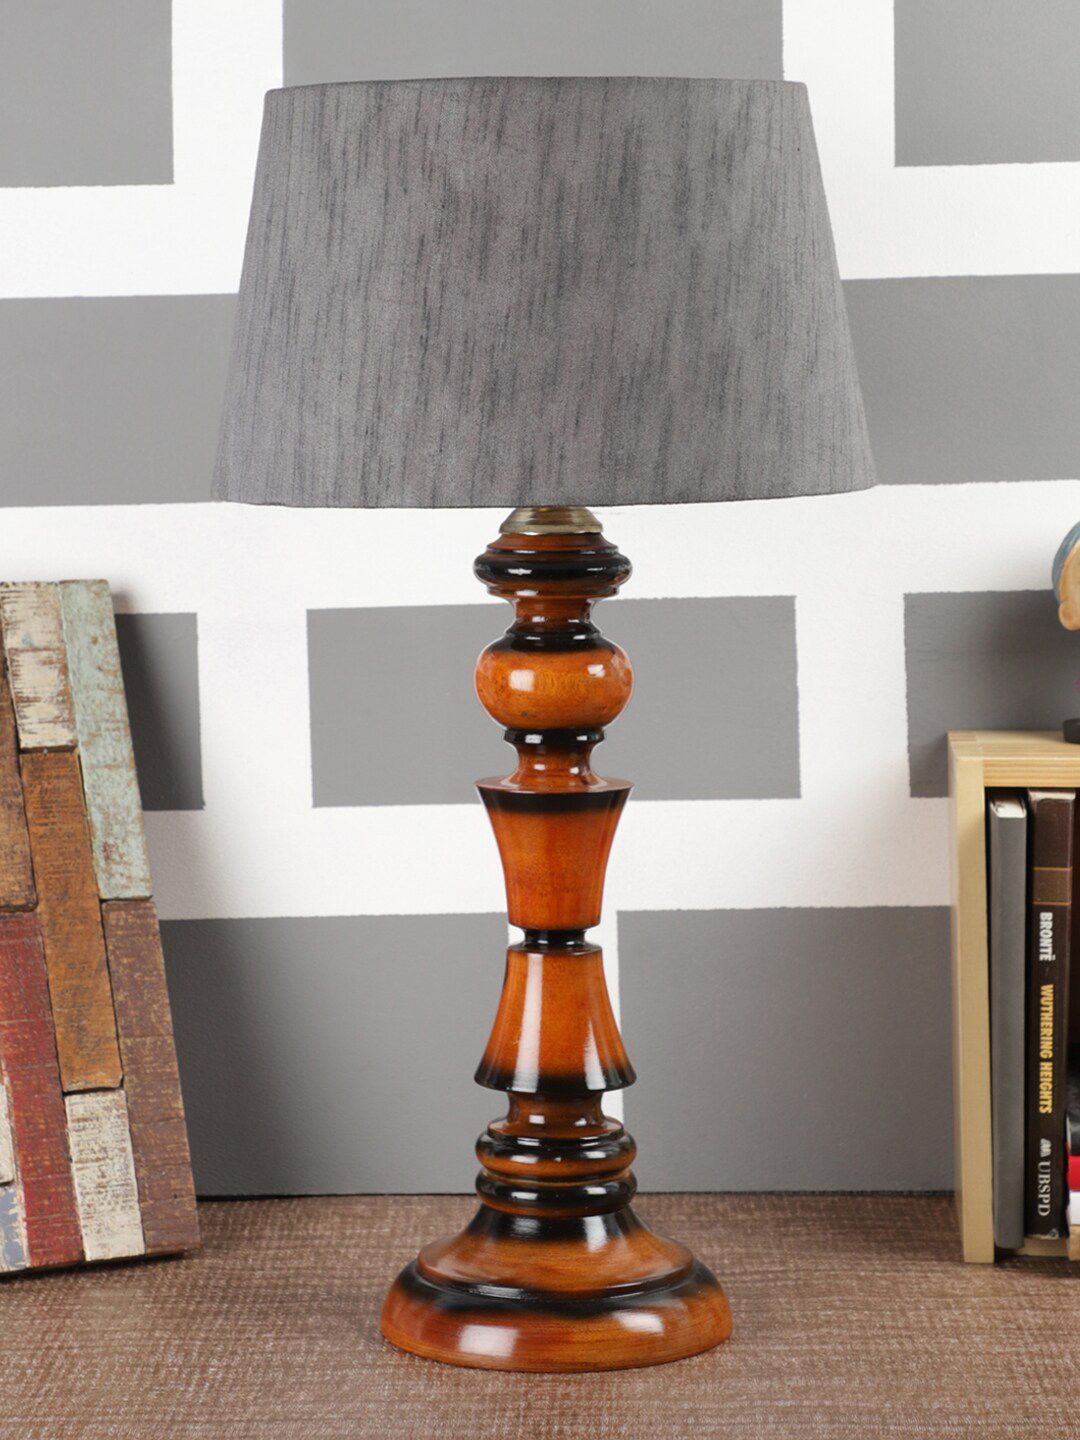 foziq Brown & Black Table Lamp with Shade Price in India